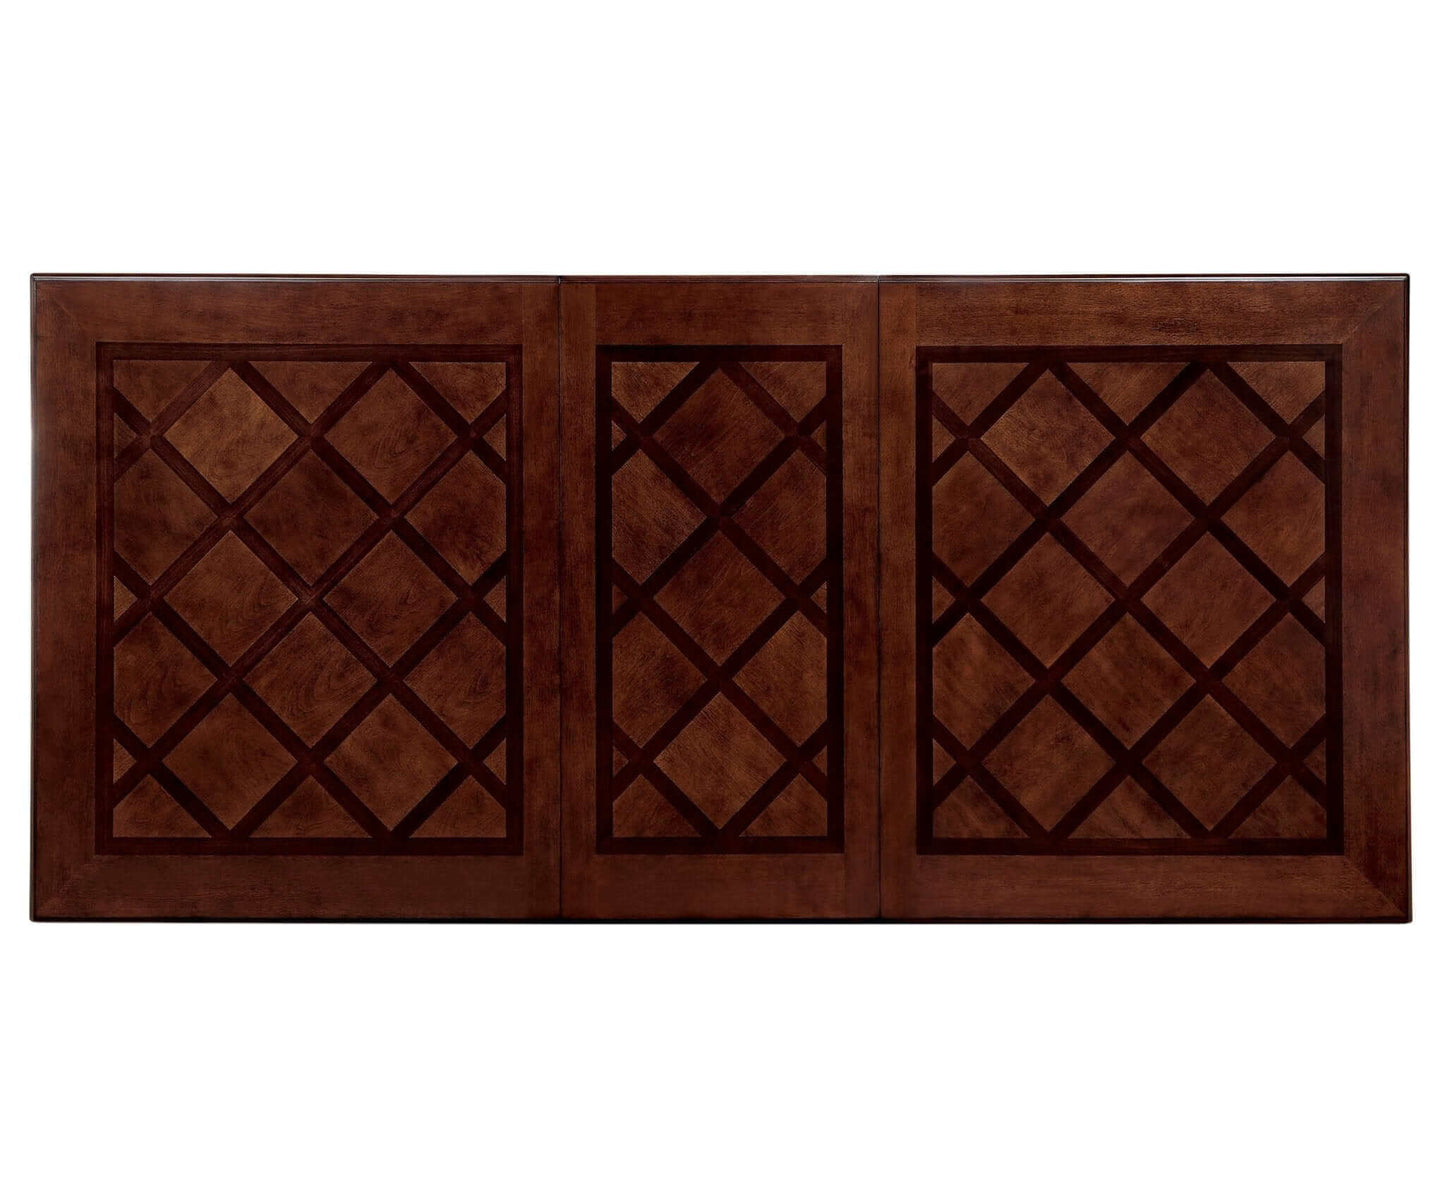 Brown cherry finish dining table with intricate geometric design